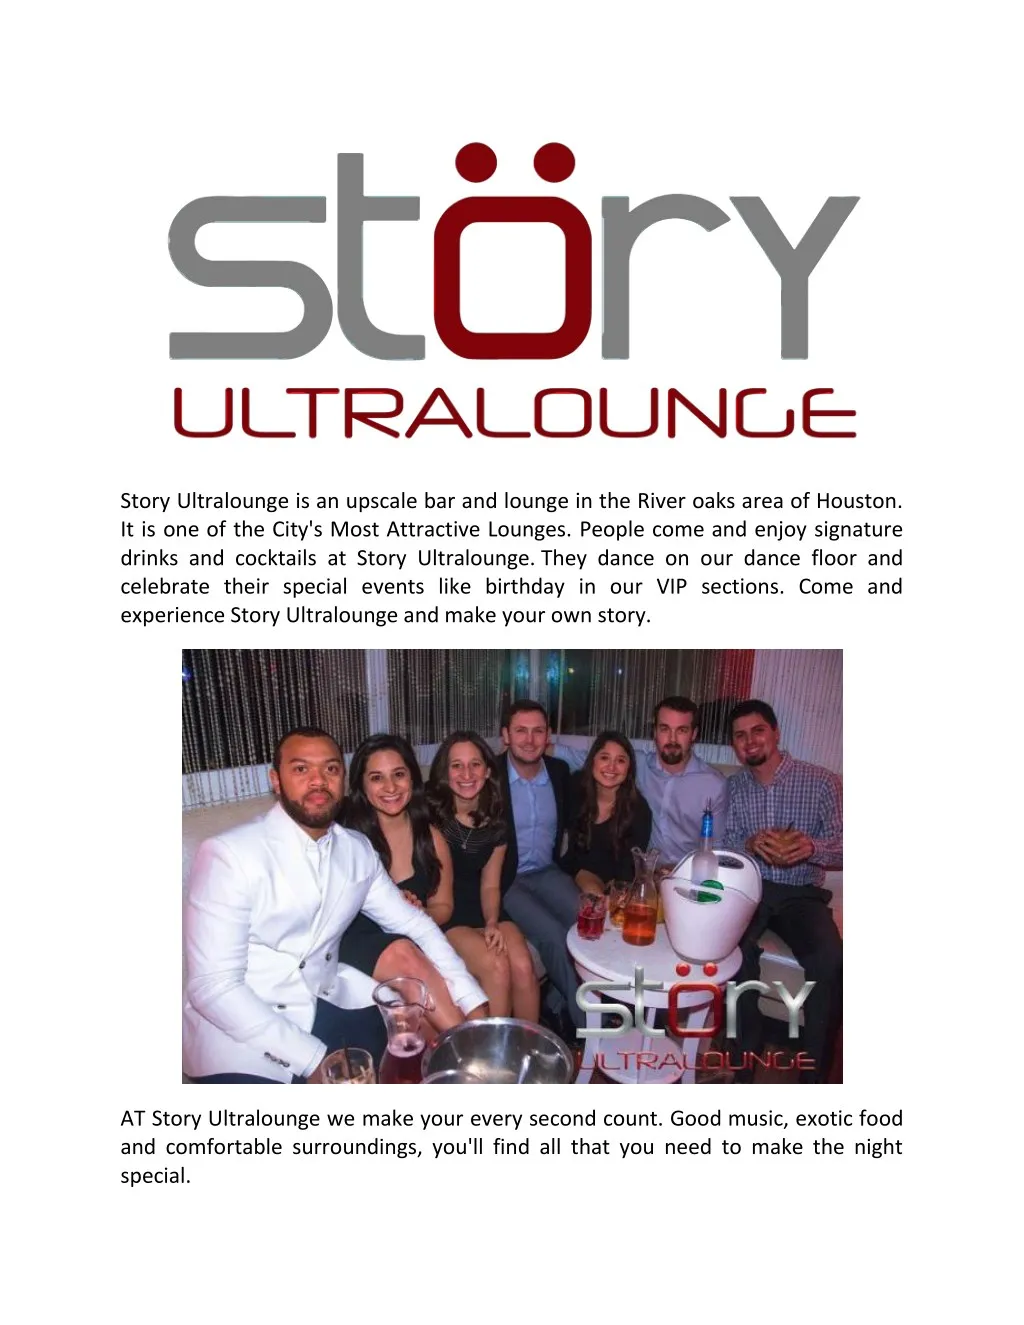 story ultralounge is an upscale bar and lounge